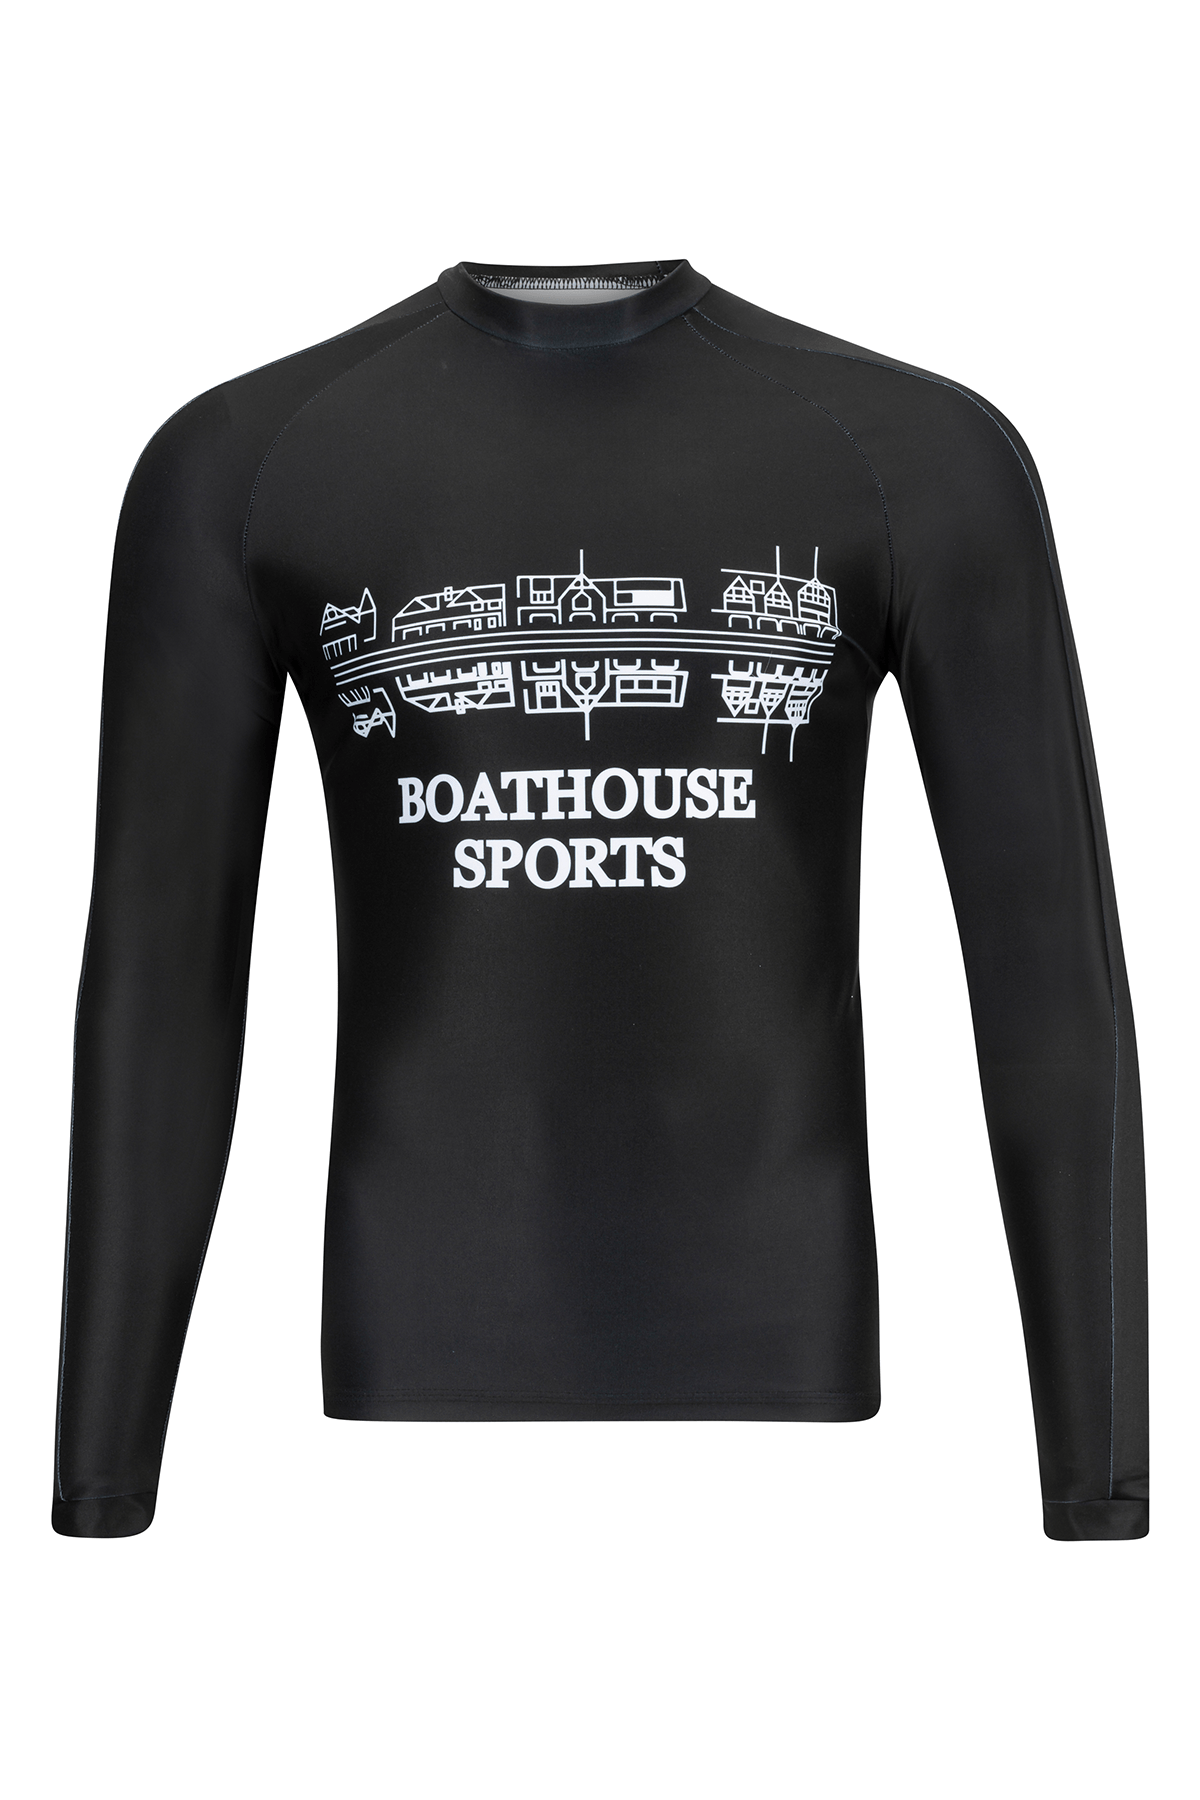 Women's Signature Boathouse Row Long Sleeve Compression Top Black / Small